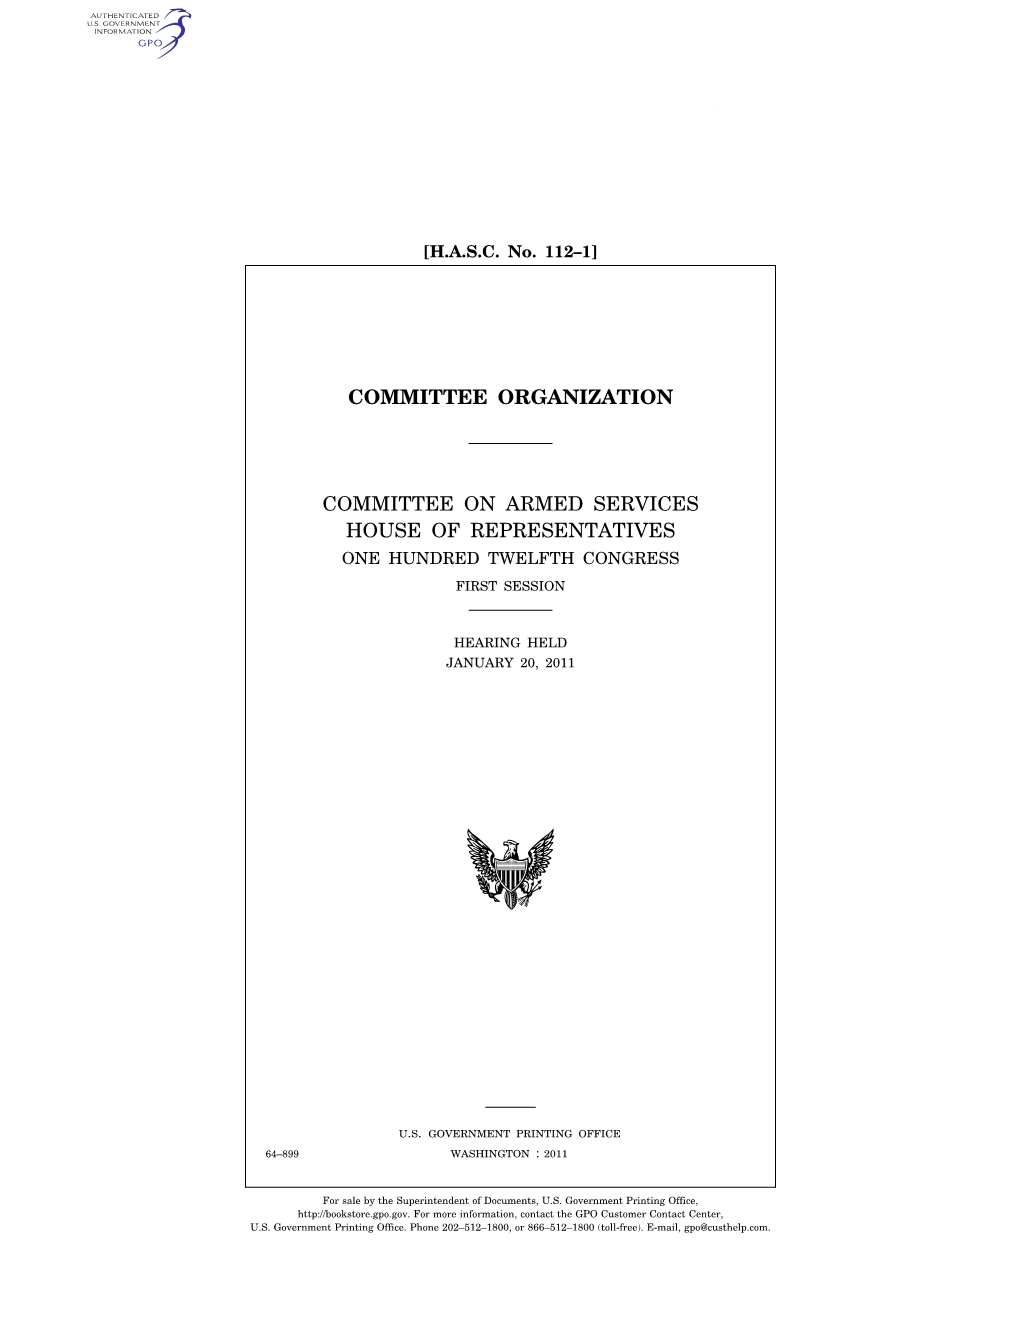 Committee Organization Committee on Armed